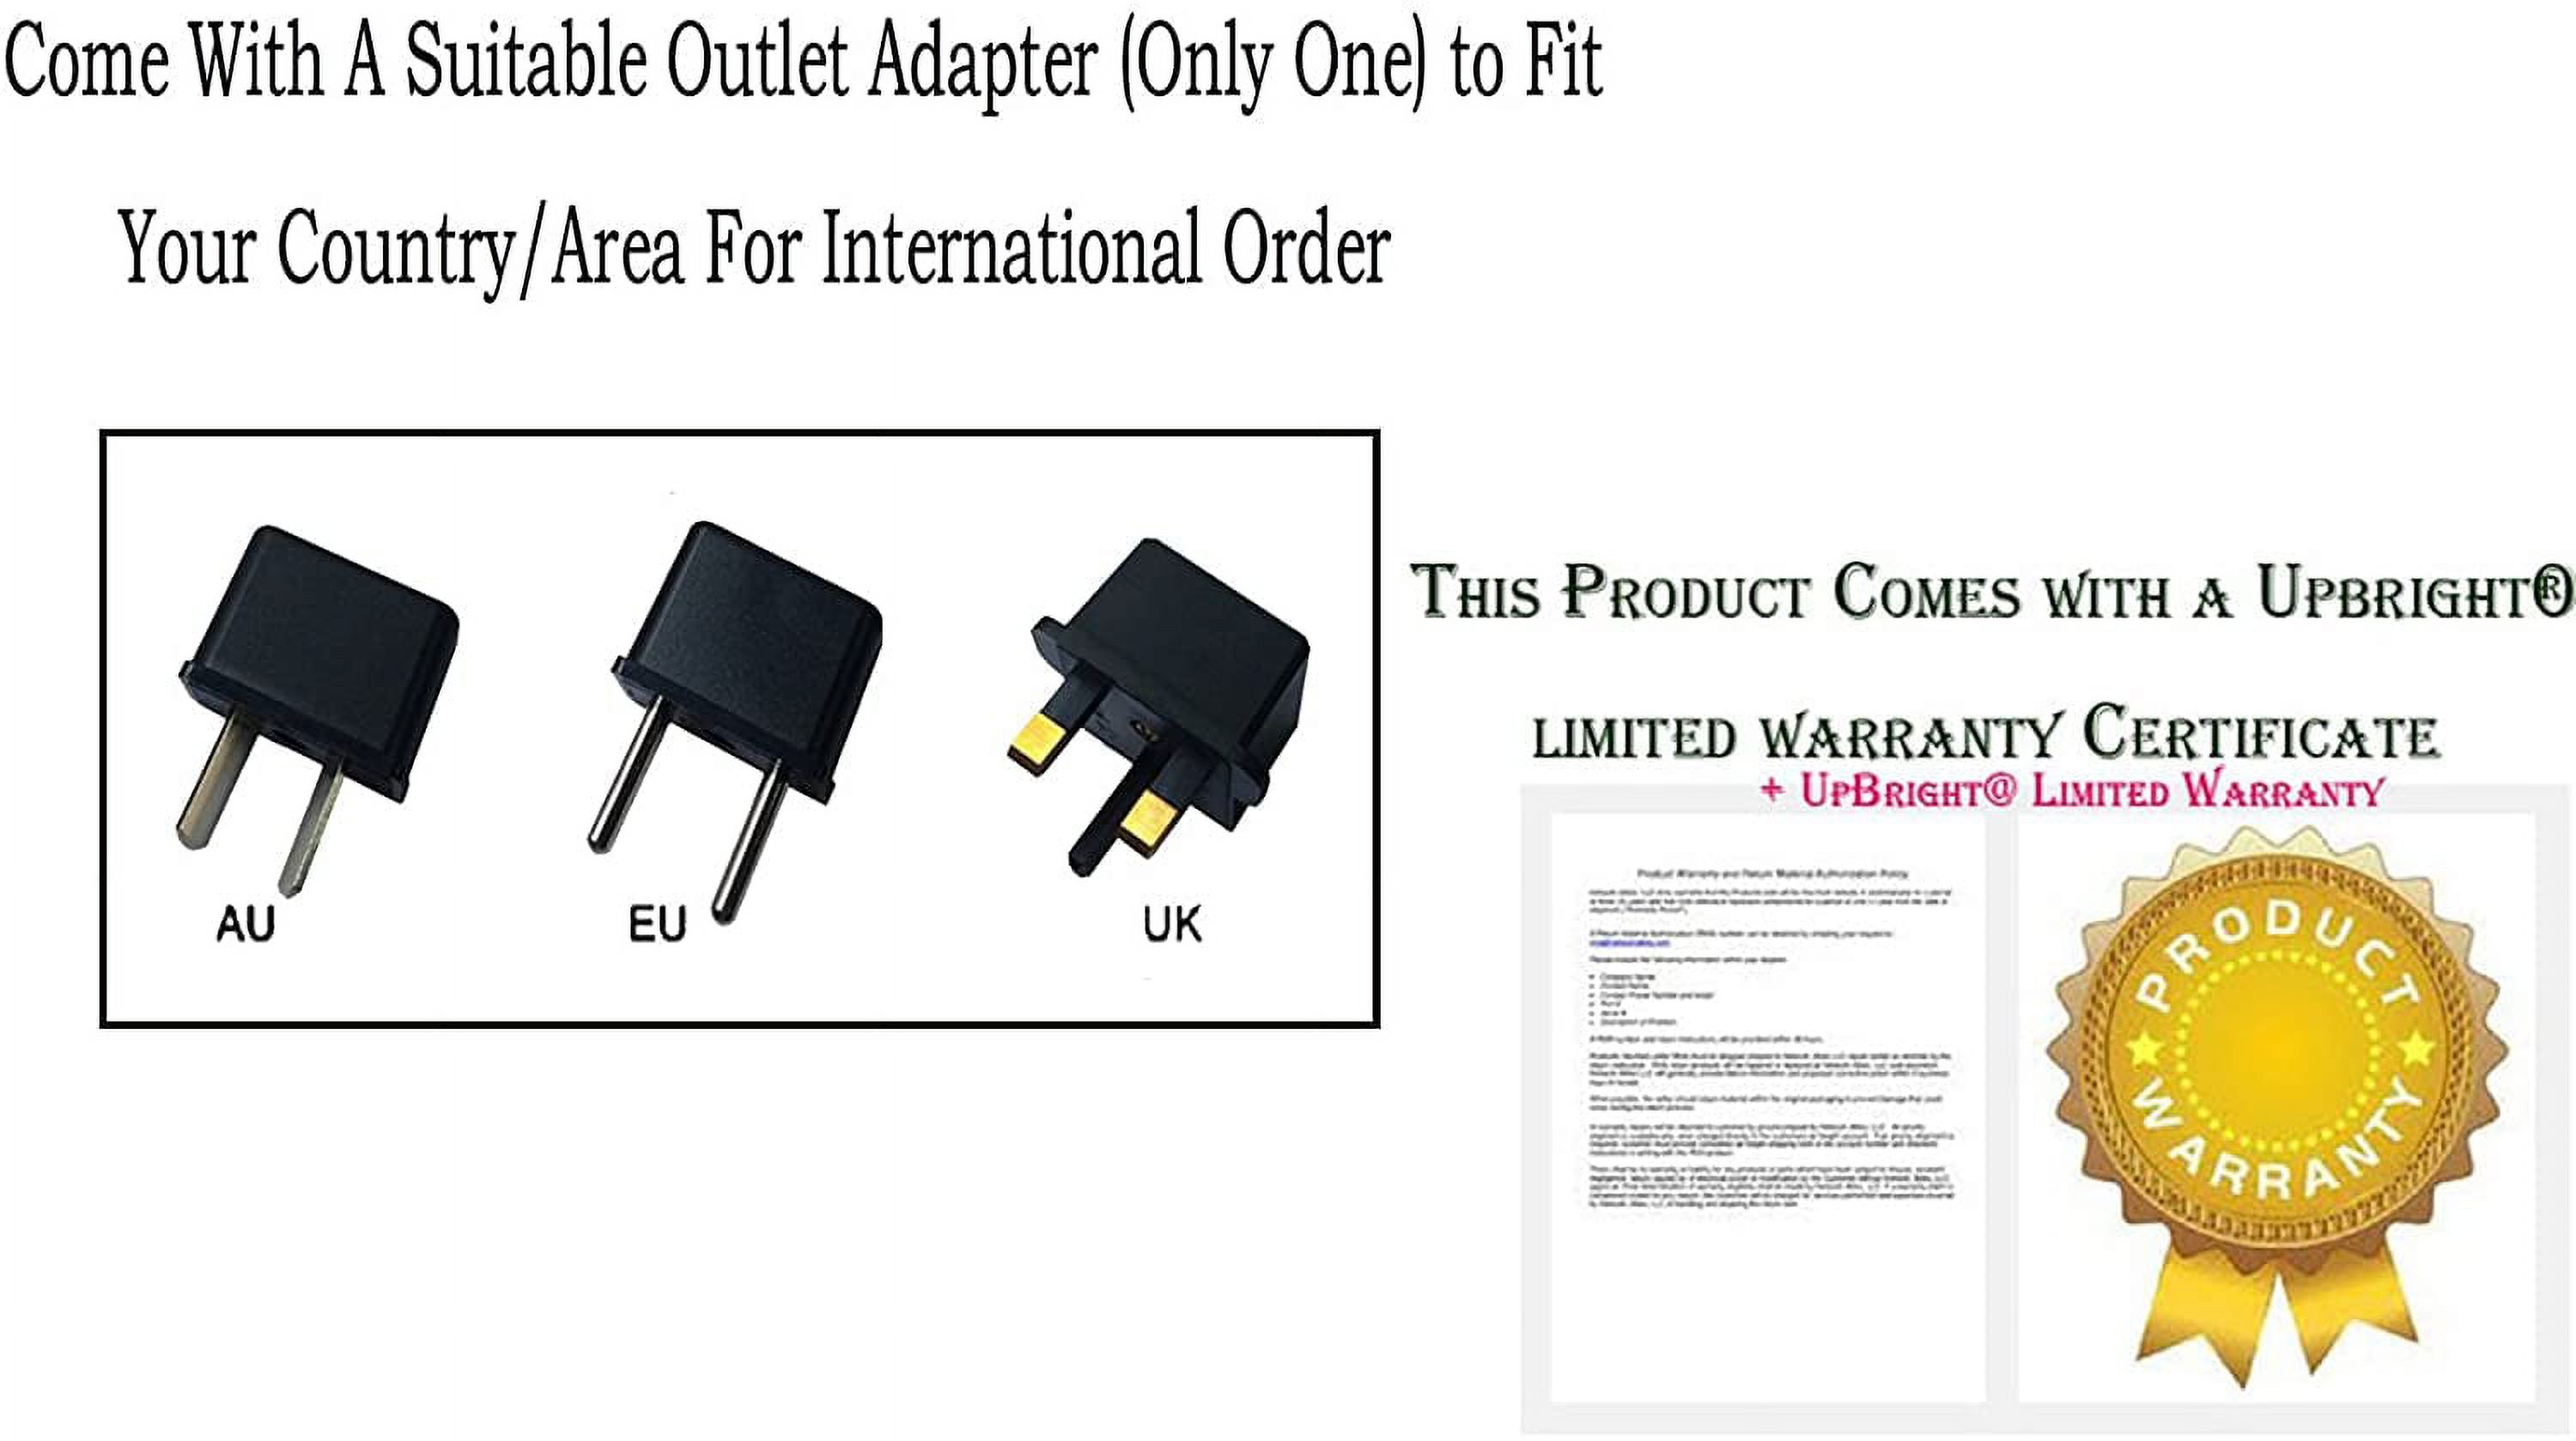 UpBright 3-Pin 12V AC/DC Adapter Compatible with Skyworth SLC-1921A SLC-1921A-3S SLC-1519A-3M SLC-1519A-3S SLC-1369A-3C SLC-1369A-3S SLC-1369A-3 SLC1369A3 SLC-1569A SLC-1569A-3 LED HD TV 533Z0905063PI - image 3 of 5